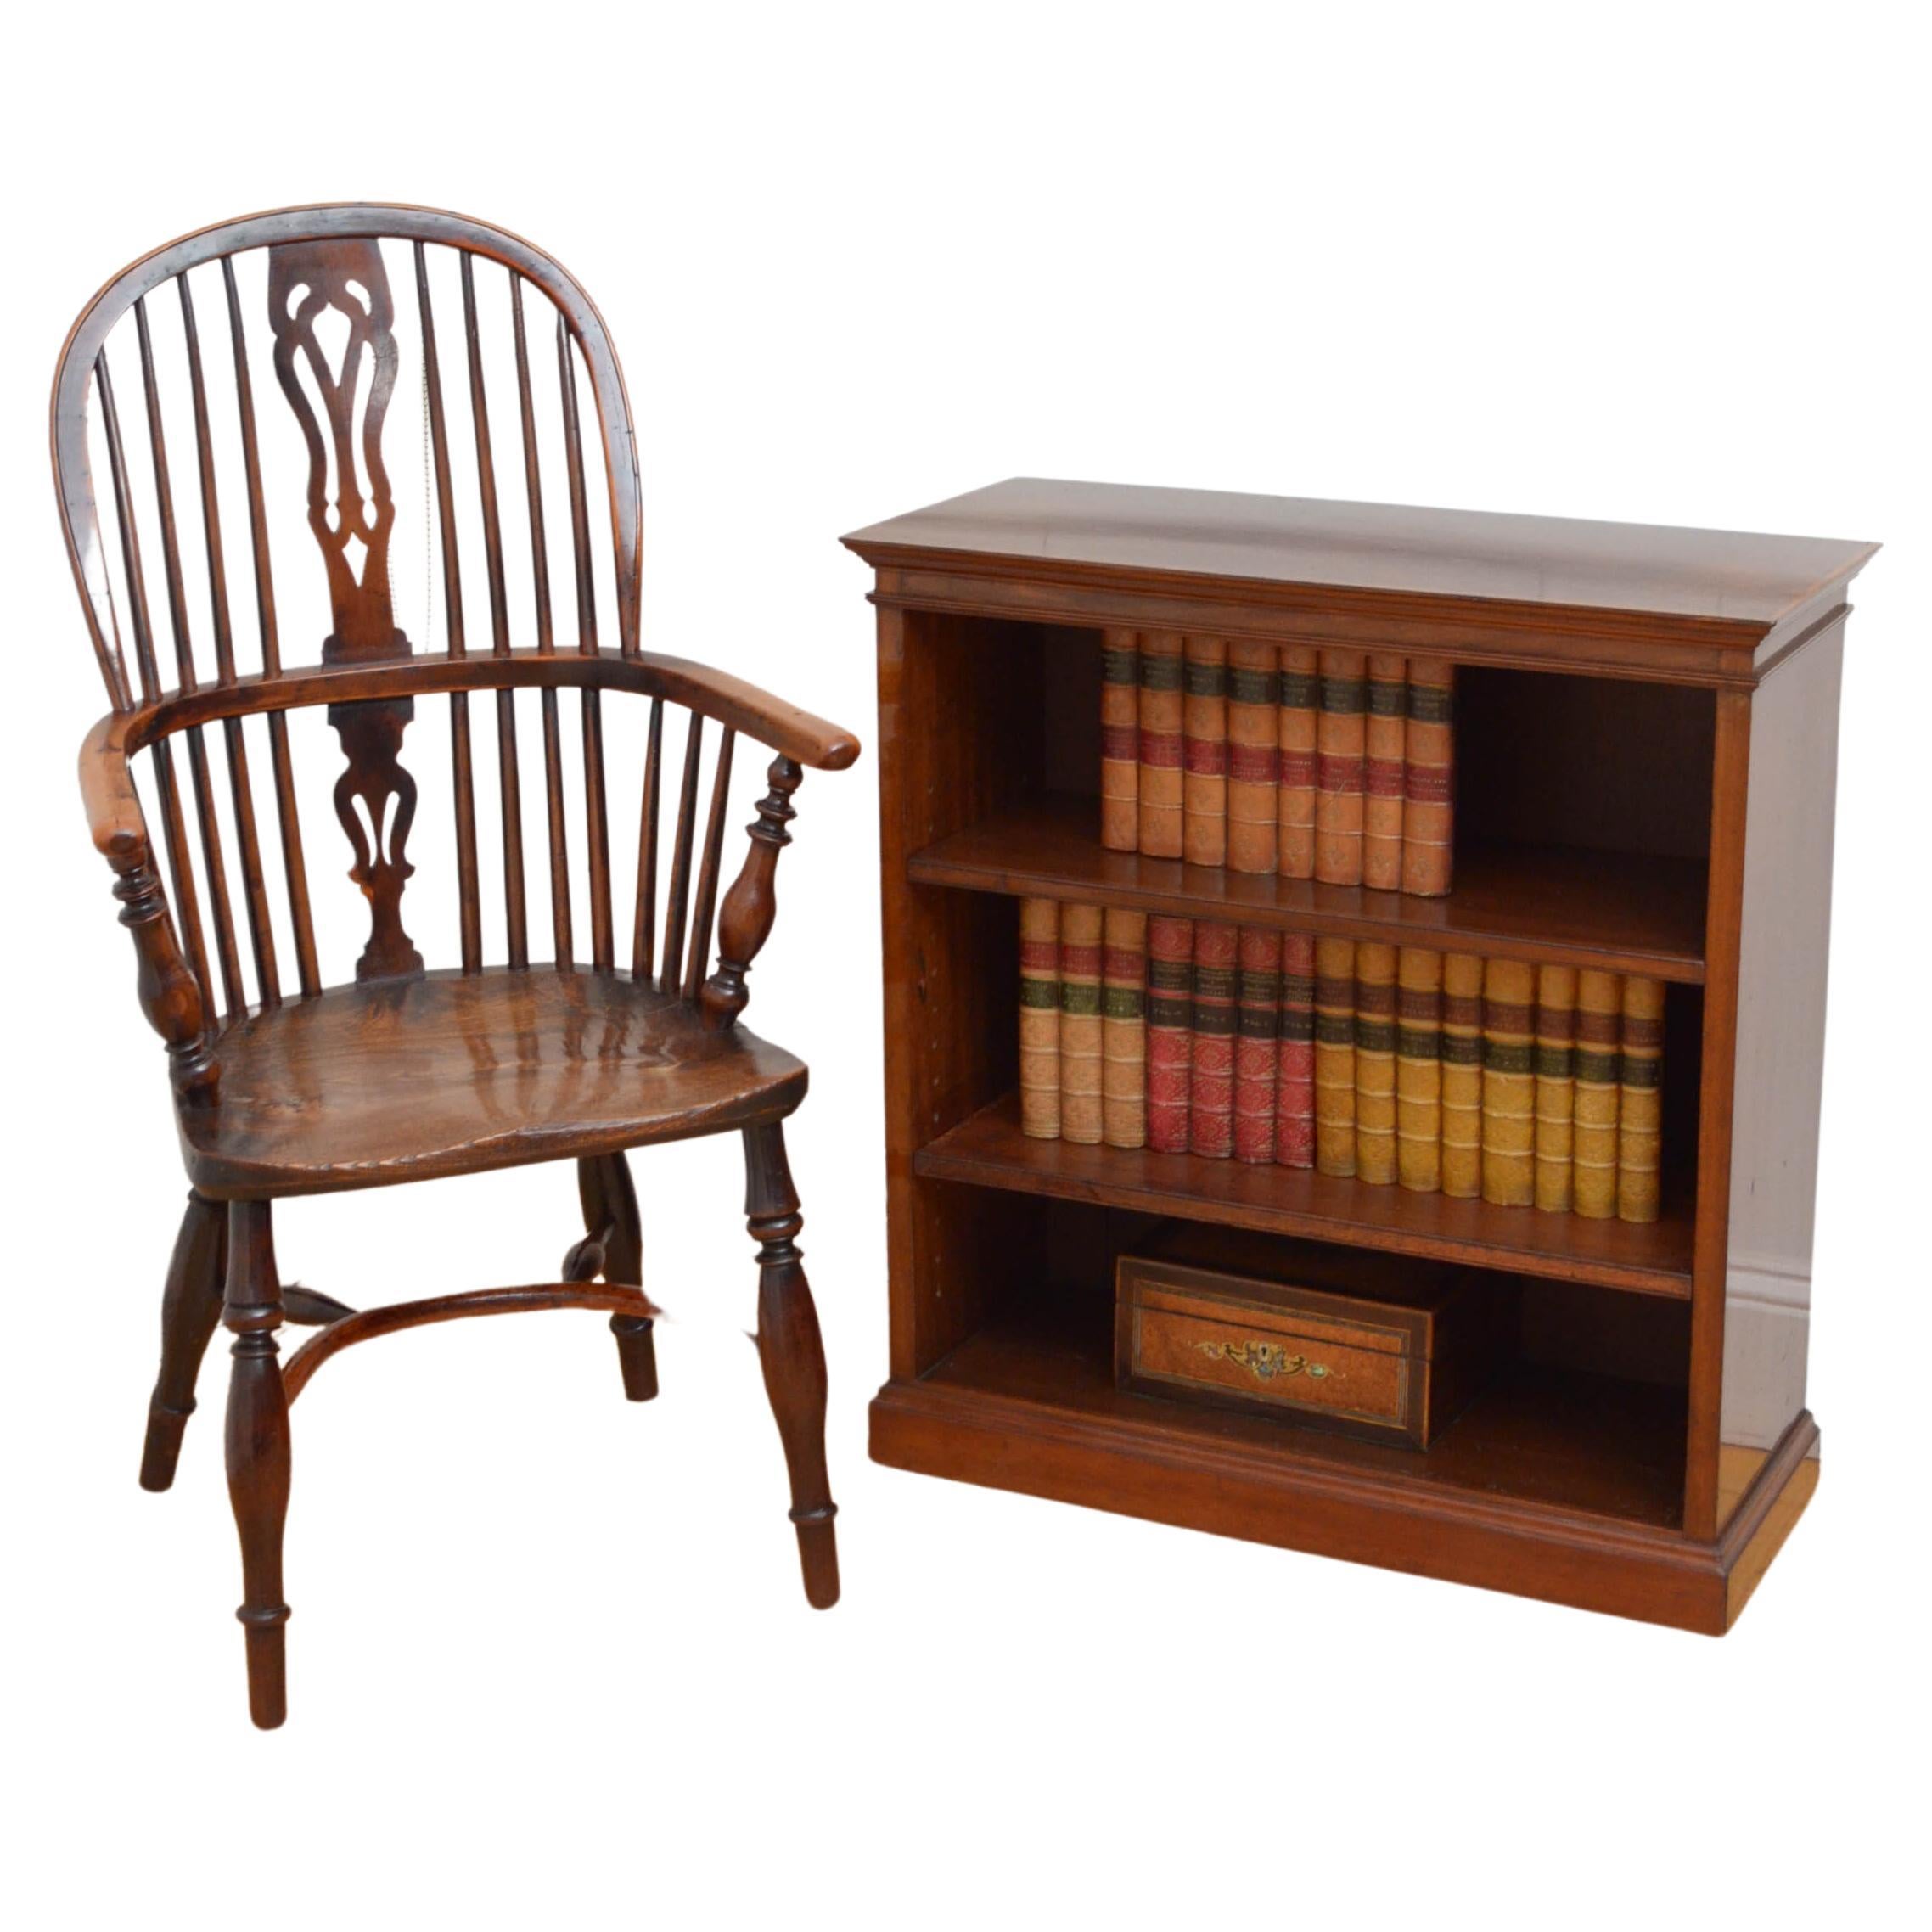 A Low Edwardian Solid Mahogany Open Bookcase For Sale